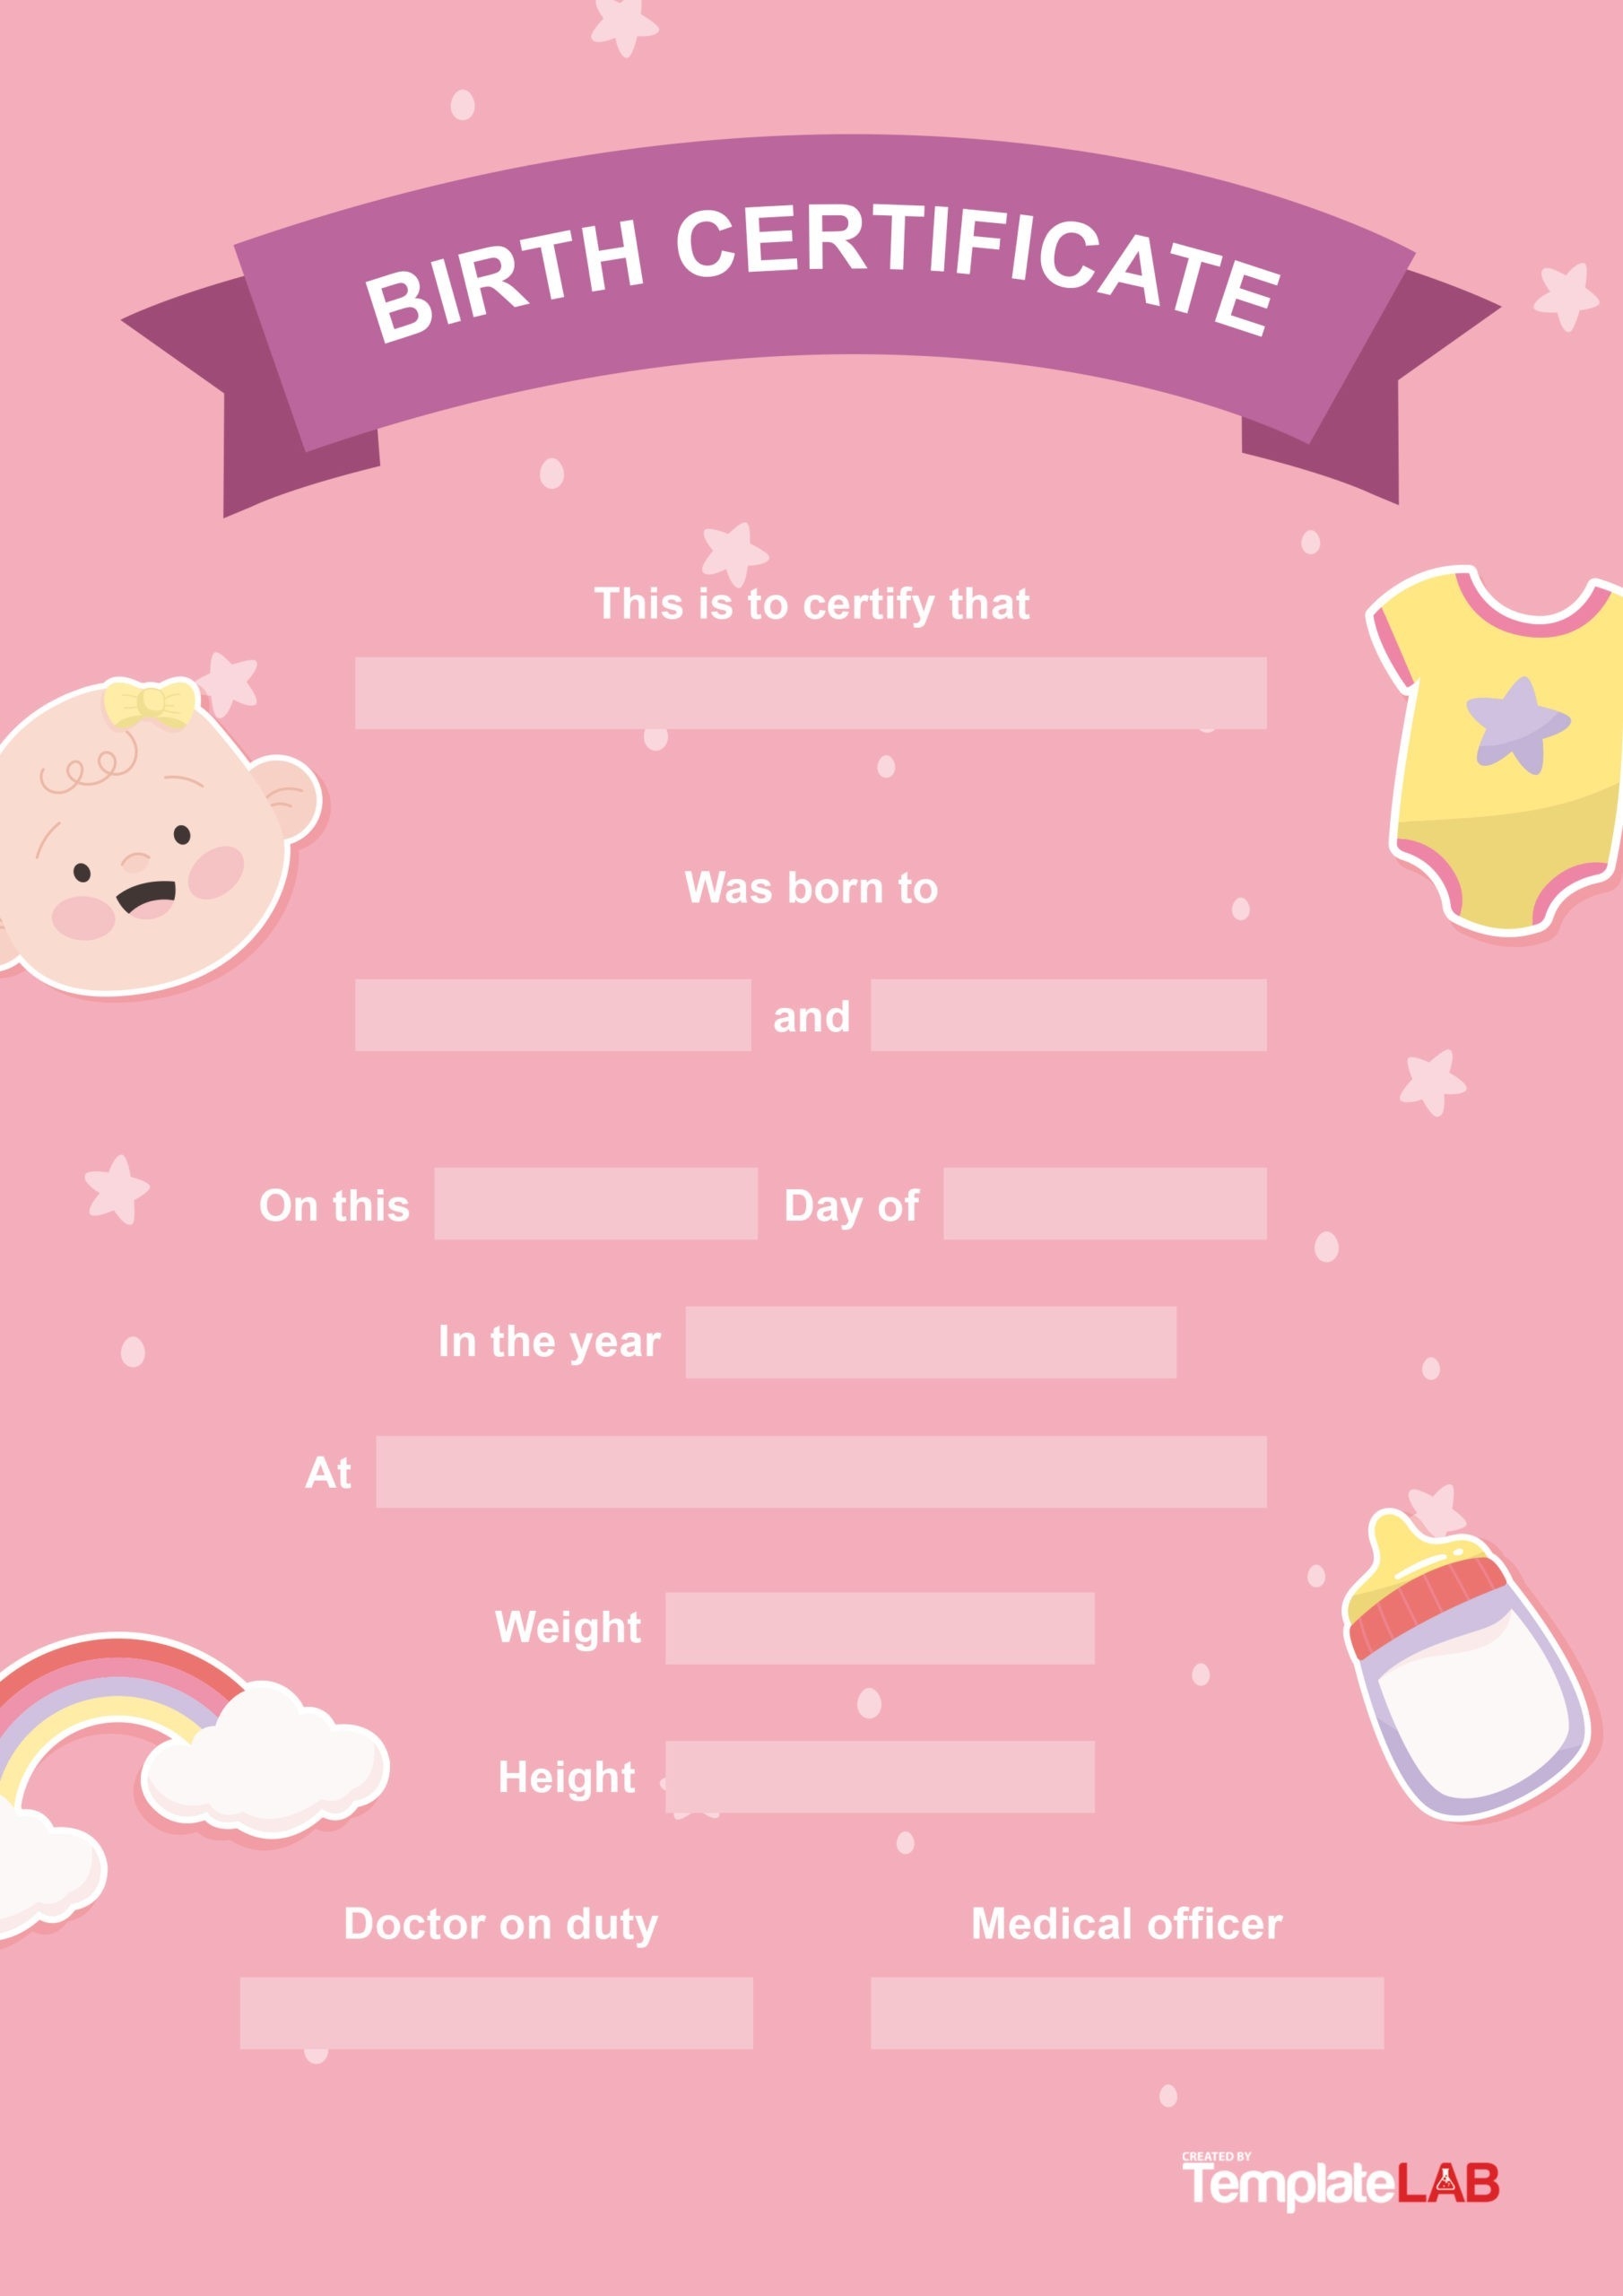 Free Printable Doll Birth Certificate